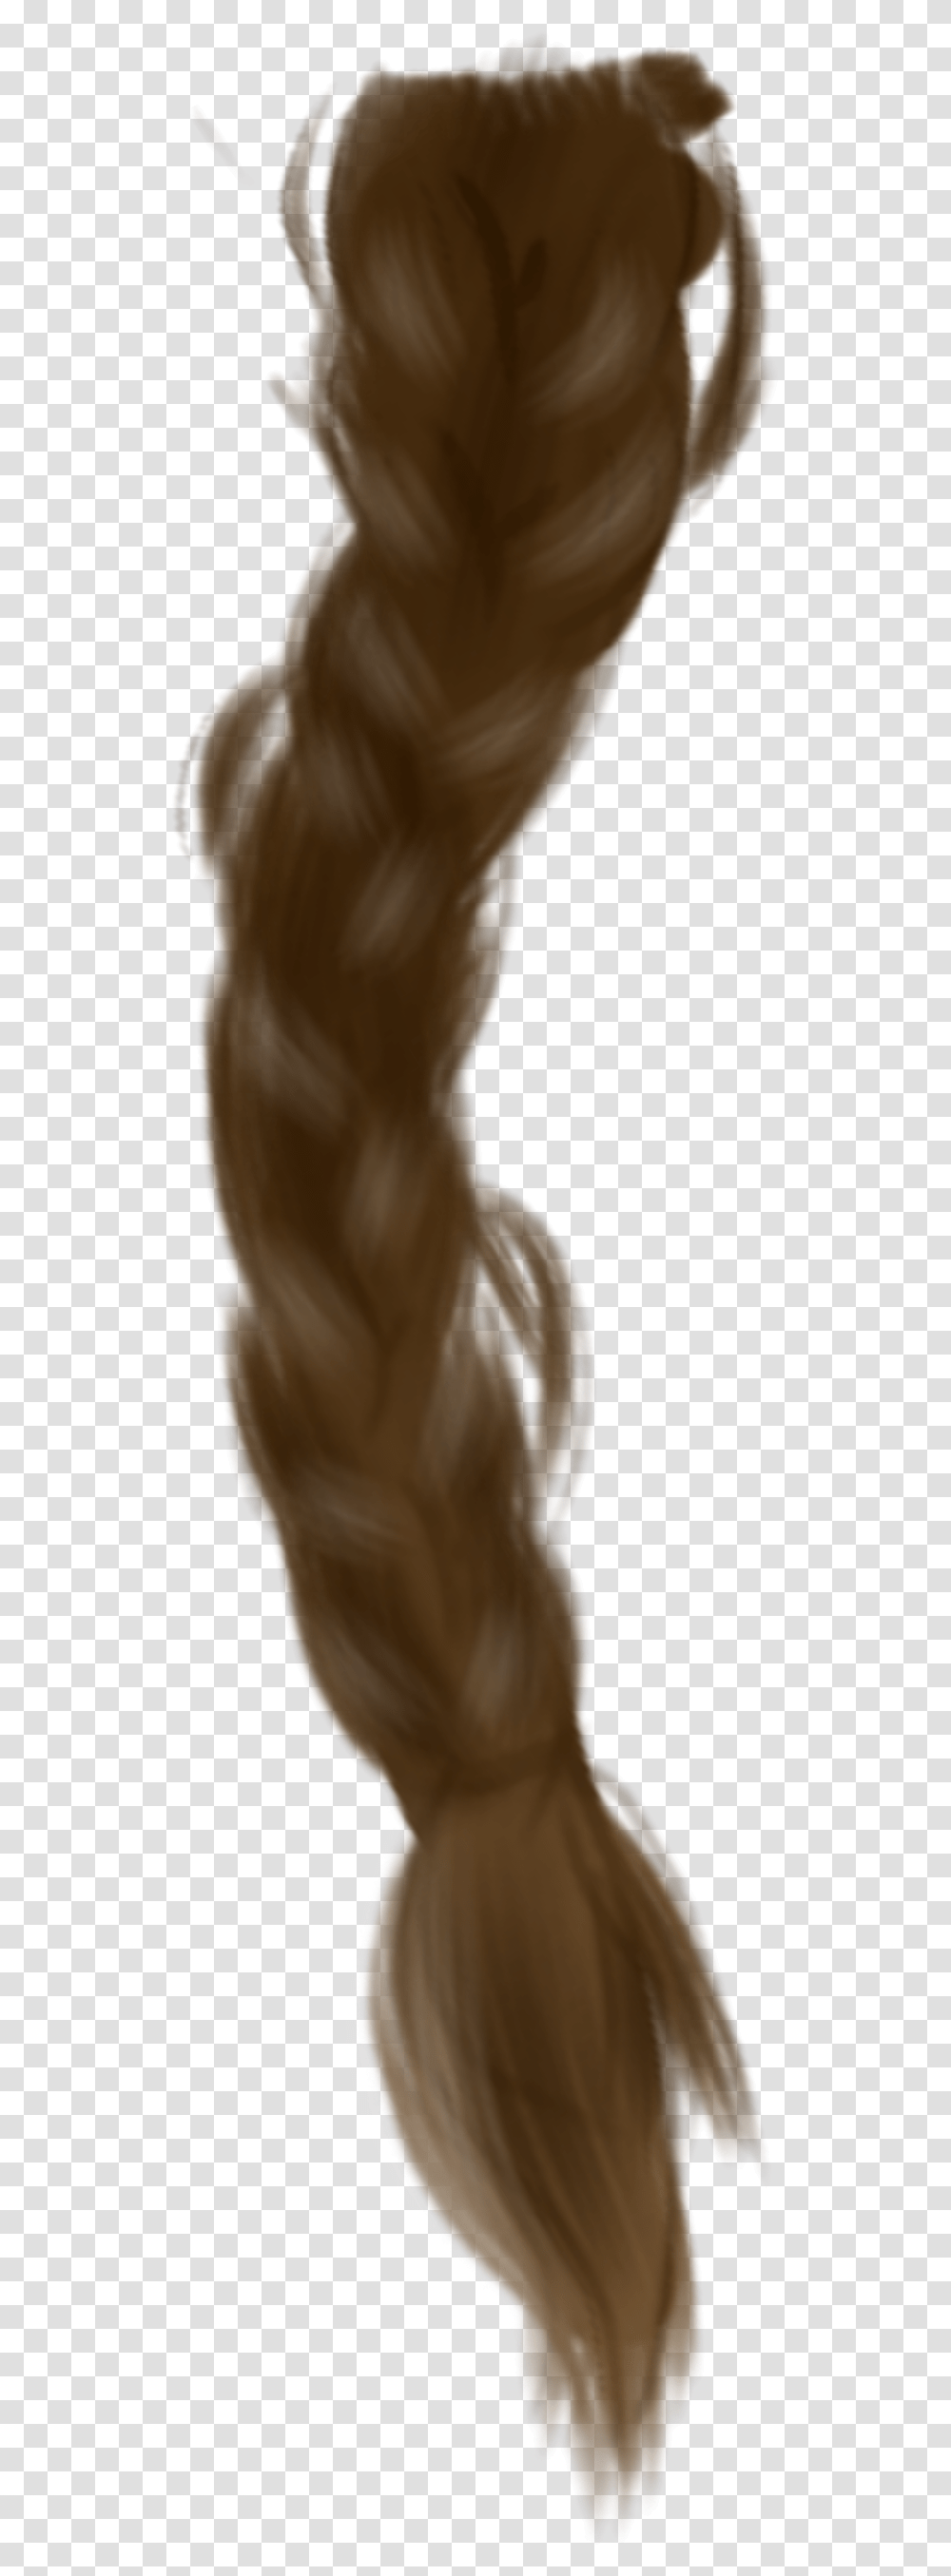 Freetoedit Remix Braid Hair Braided Gacha Gachahair Wig, Person, Finger, Ankle, Sweets Transparent Png